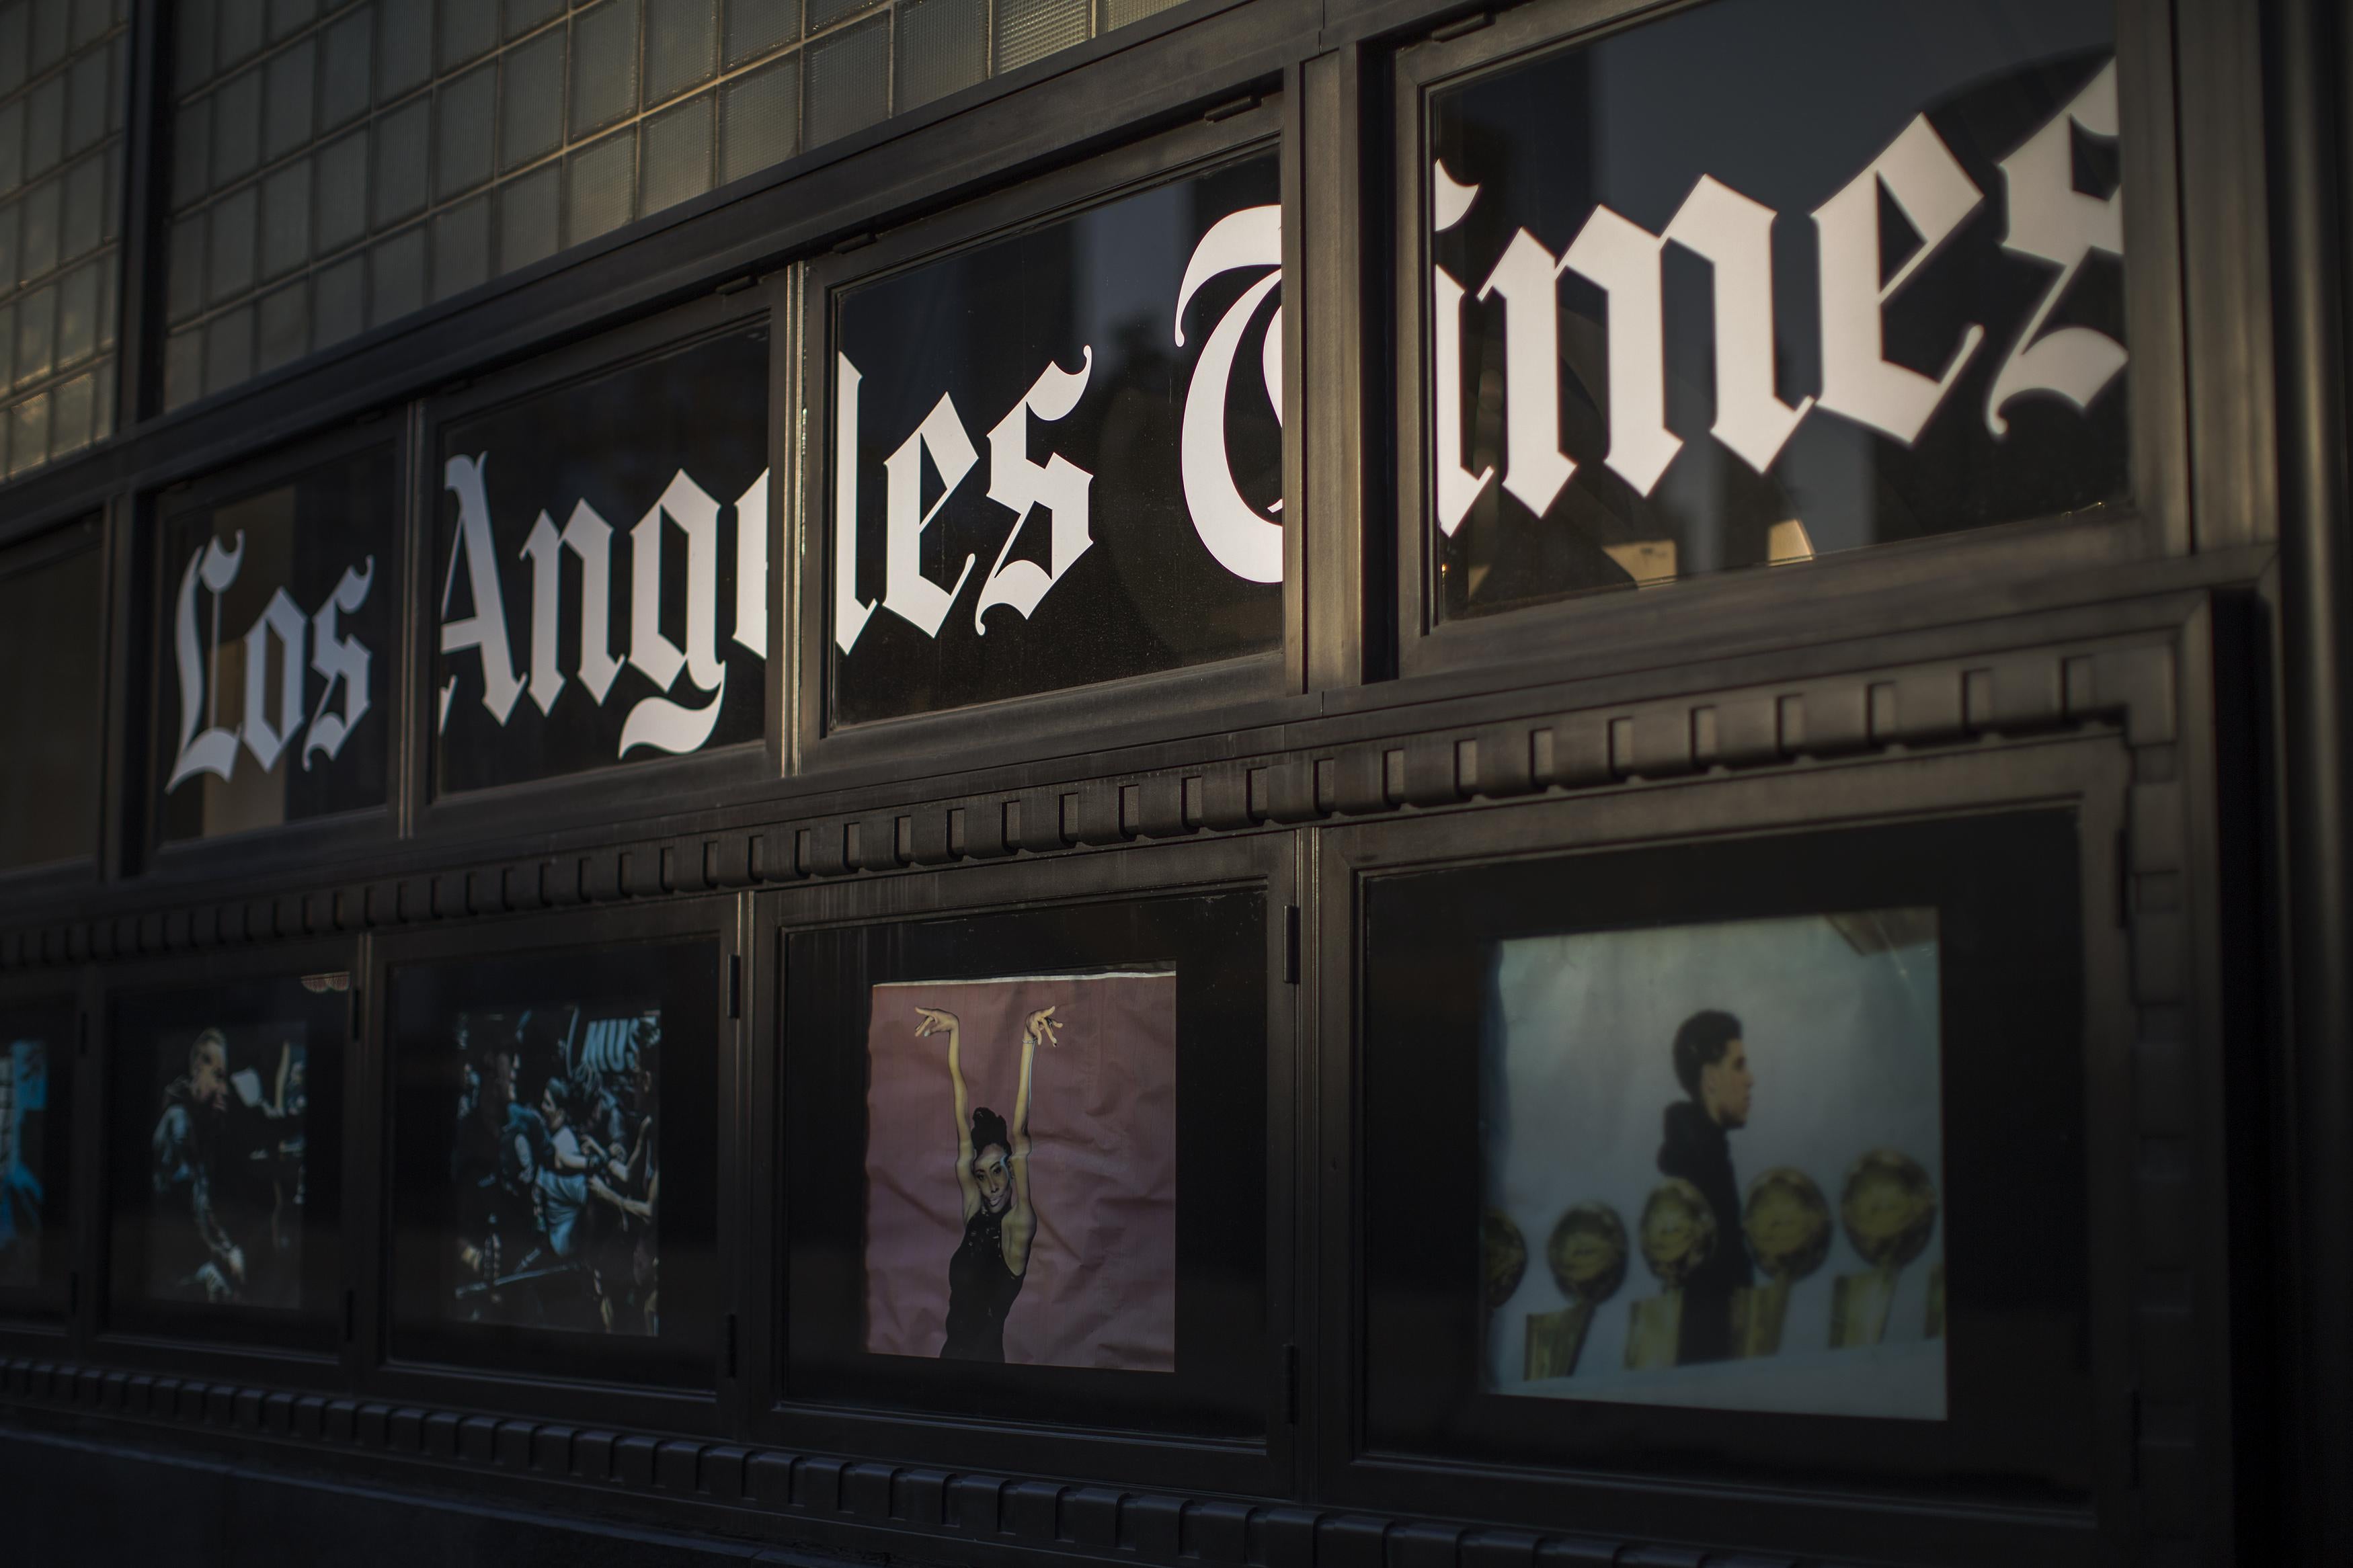 LOS ANGELES, CA - FEBRUARY 06: The Los Angeles Times building is seen on February 6, 2018 in Los Angeles, California. Parent company, Tronc, is believed to be close to selling The Times and The San Diego Union-Tribune to billionaire Los Angeles doctor, Patrick Soon-Shiong, for about $500 million.  (Photo by David McNew/Getty Images)